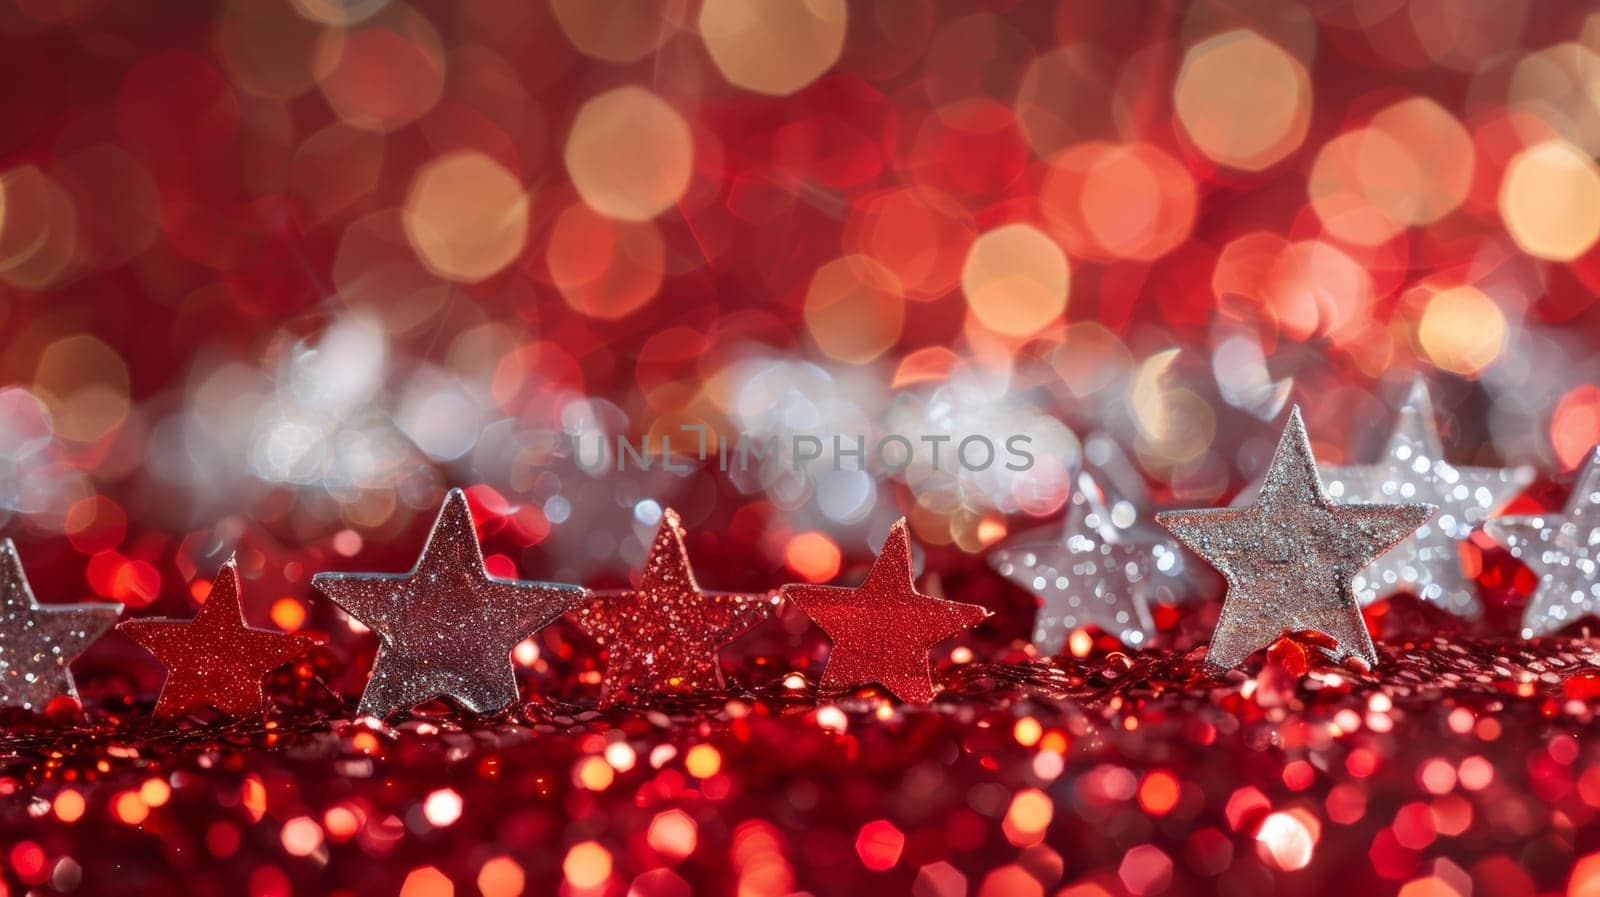 A row of silver stars on a red background with shiny lights, AI by starush